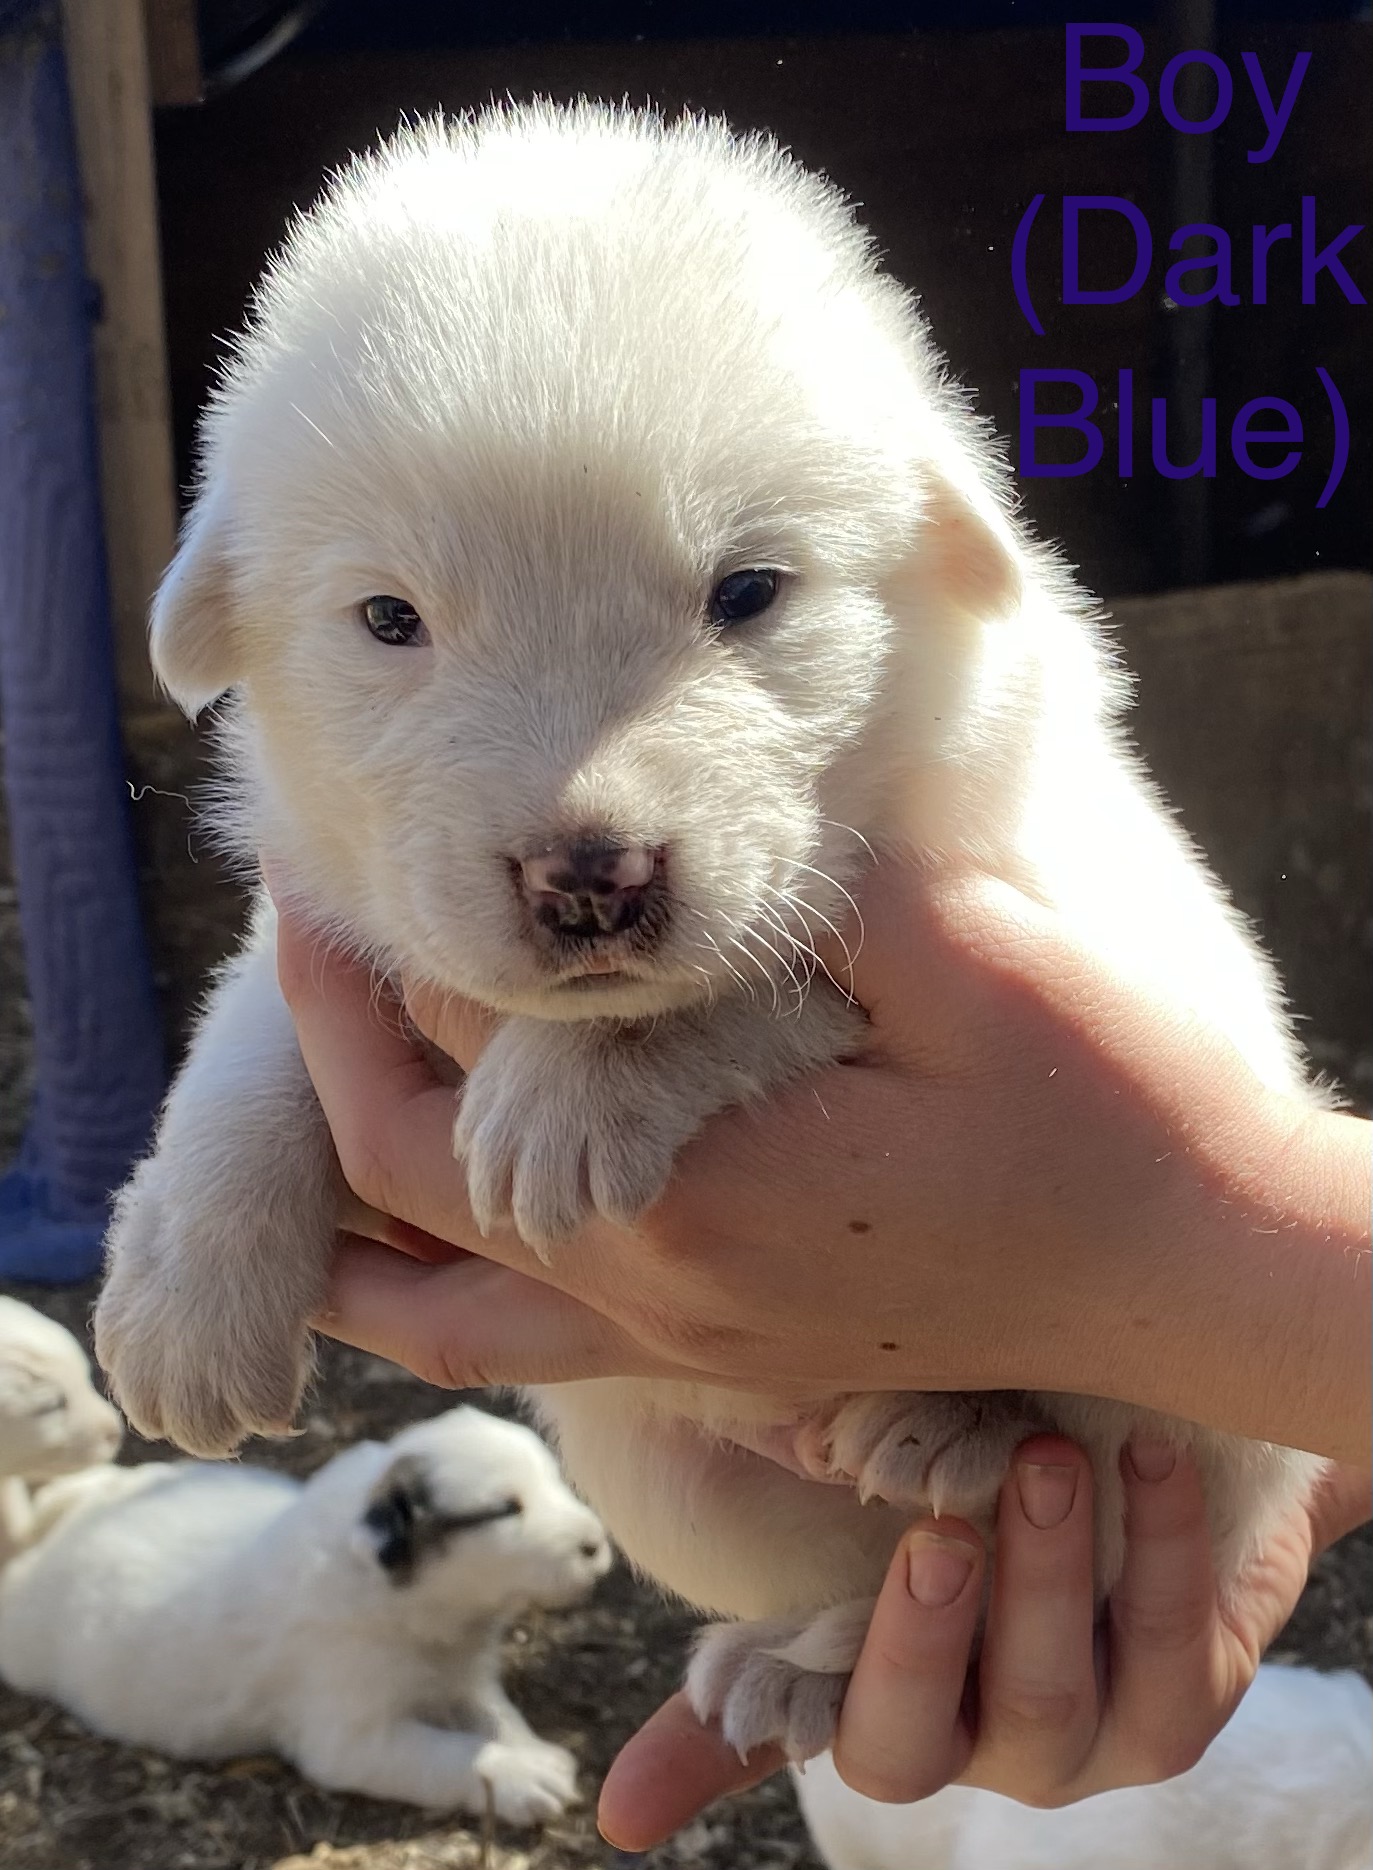 LGD puppies for sale